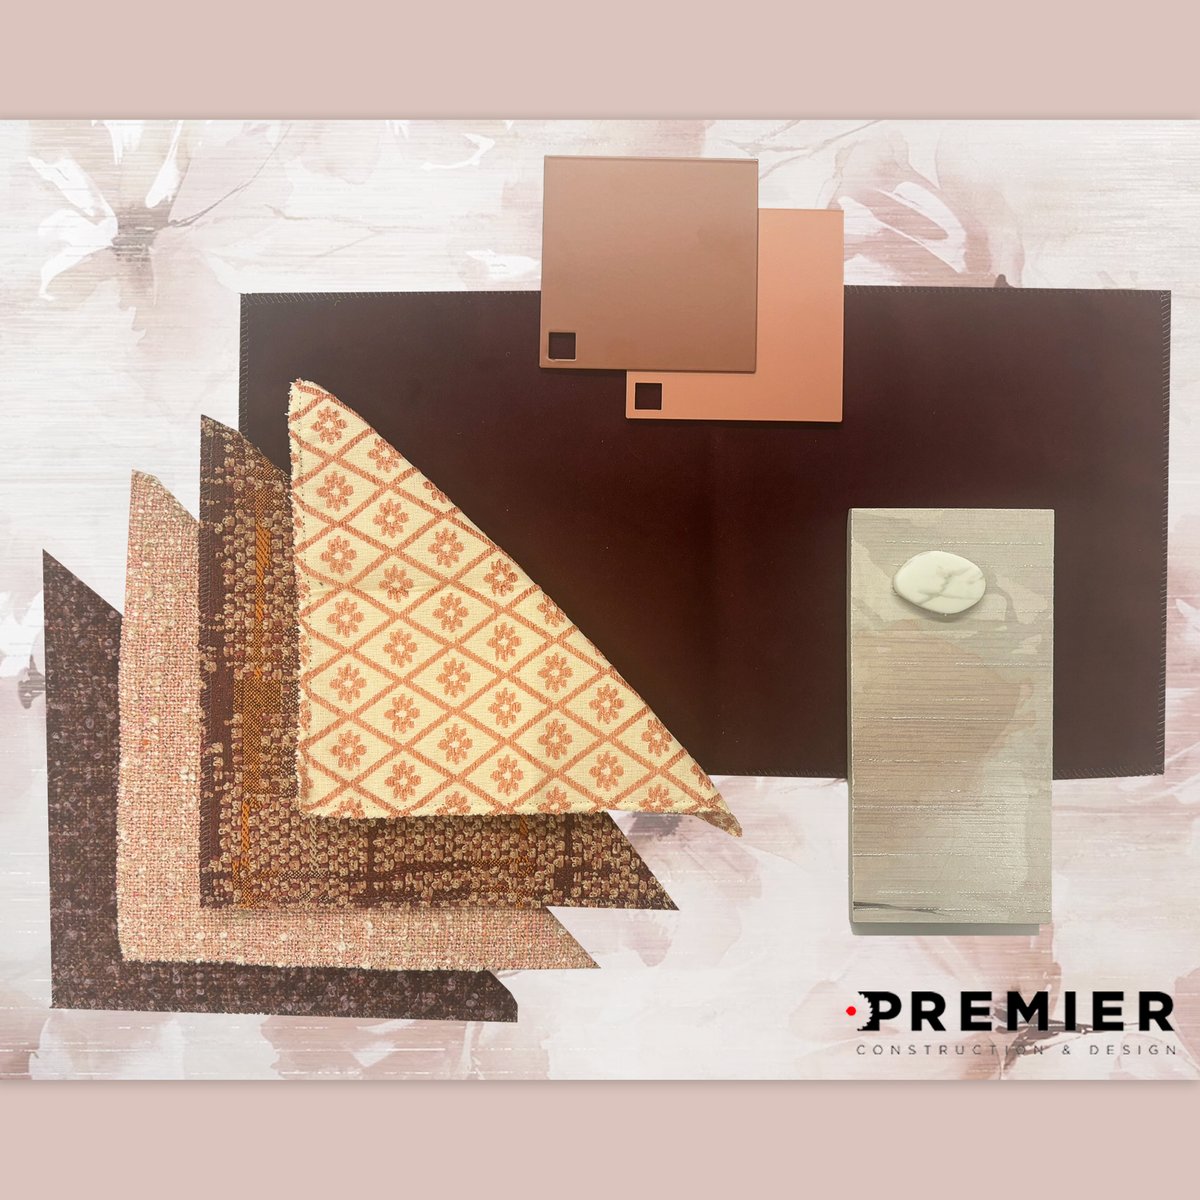 Our February Palette of the Month creates a romantic and poetic vibe inspired by Peach Fuzz, Pantone's Color of the Year. Featuring products by: @TileBar, @luumtextiles, @Teknion, and @Kravet. #designpalette #designideas